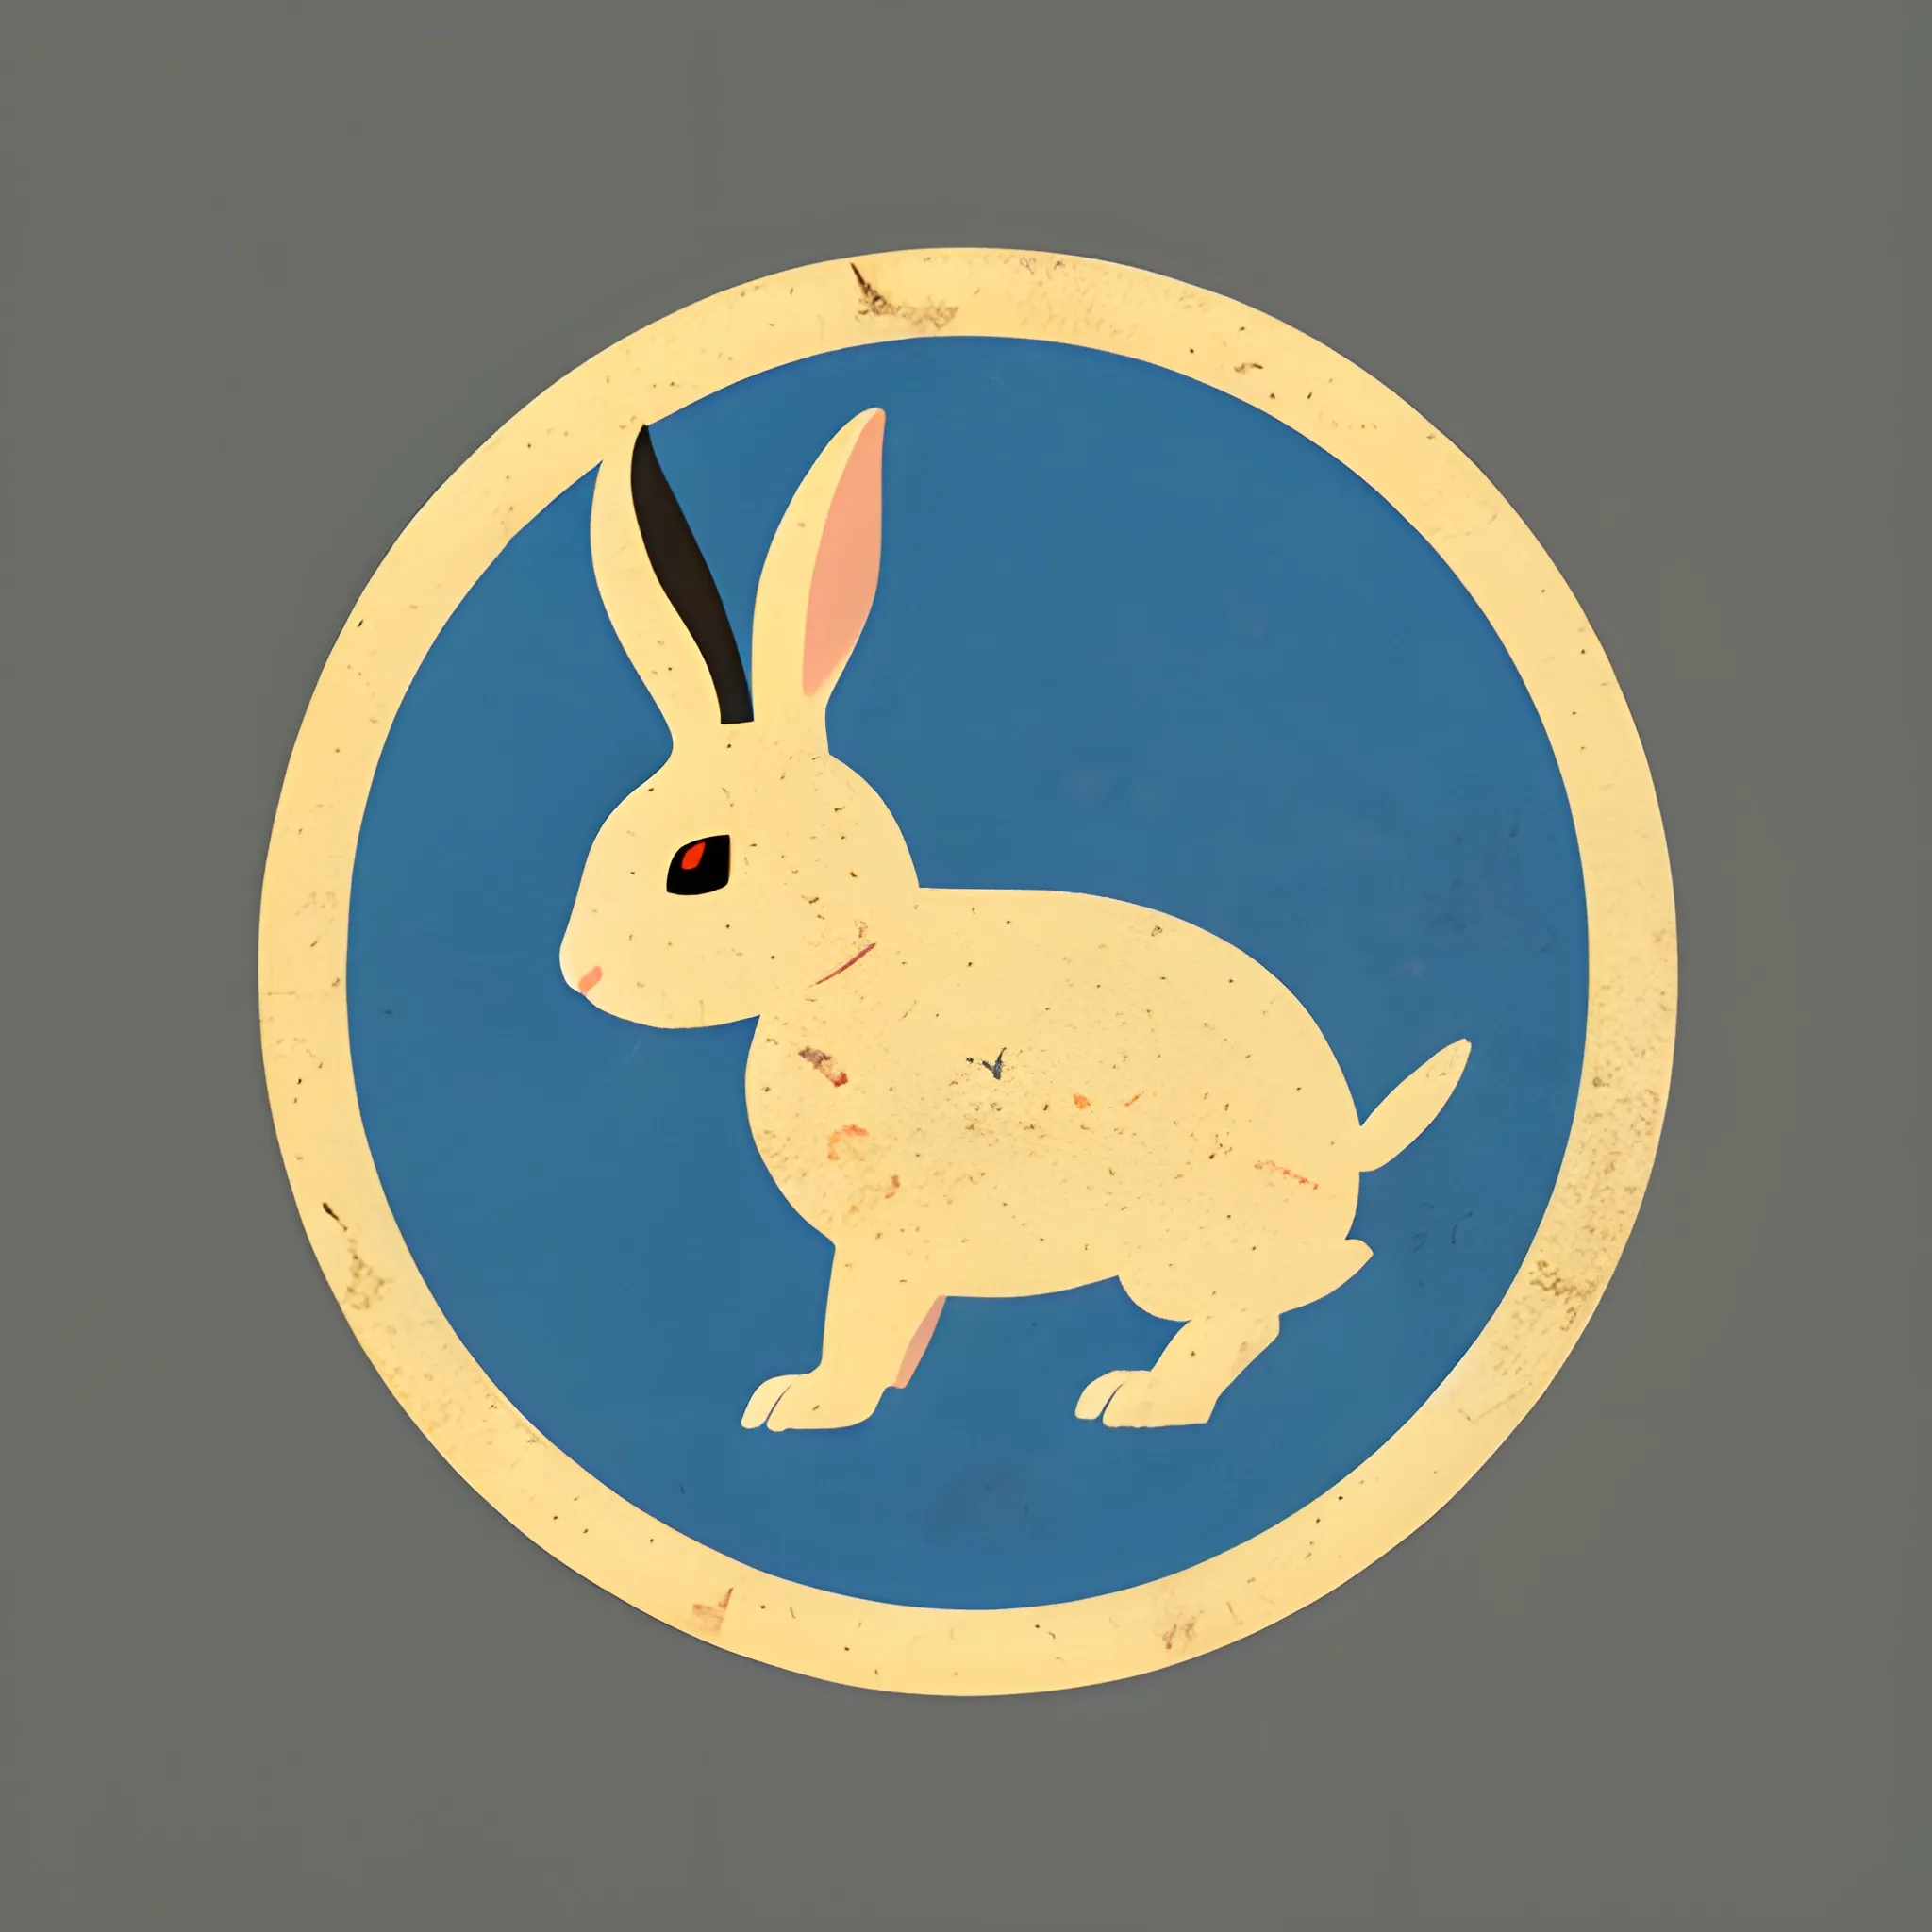 an old logo representing a rabbit mixed with a world map